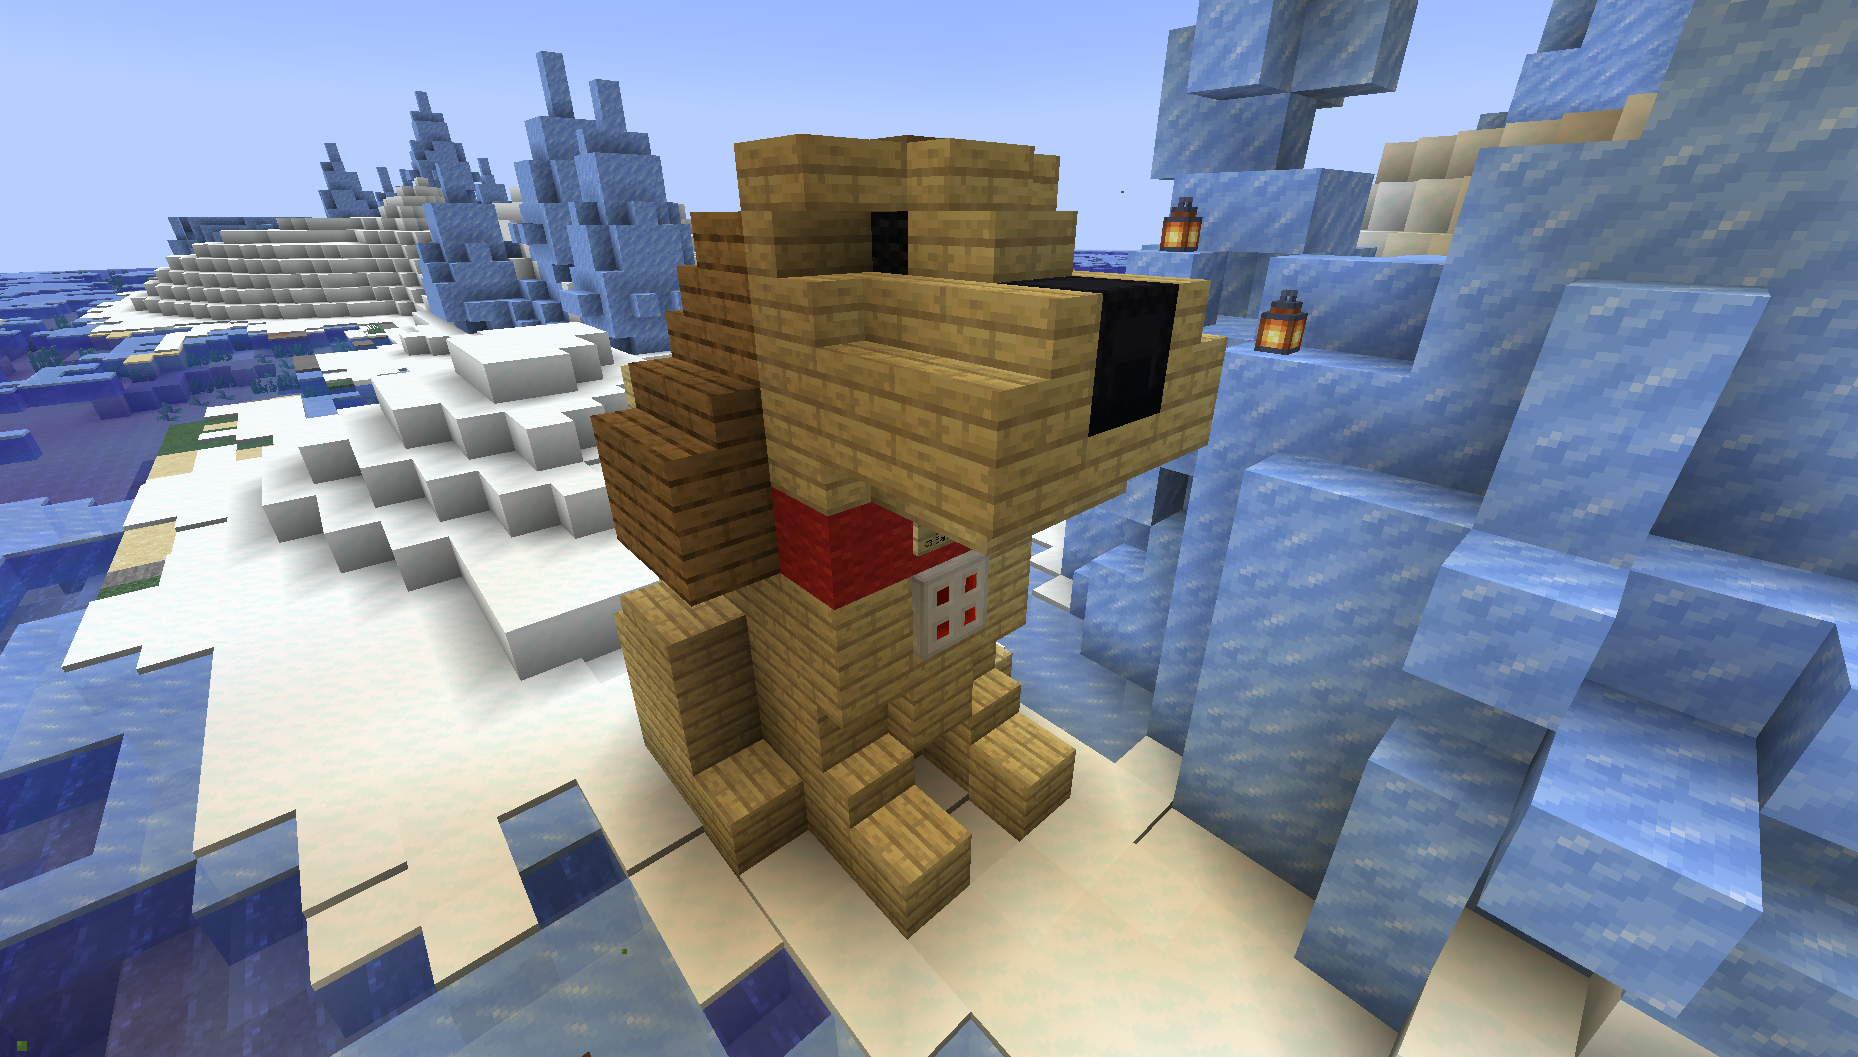 A construction of a cockapoo dog in Minecraft